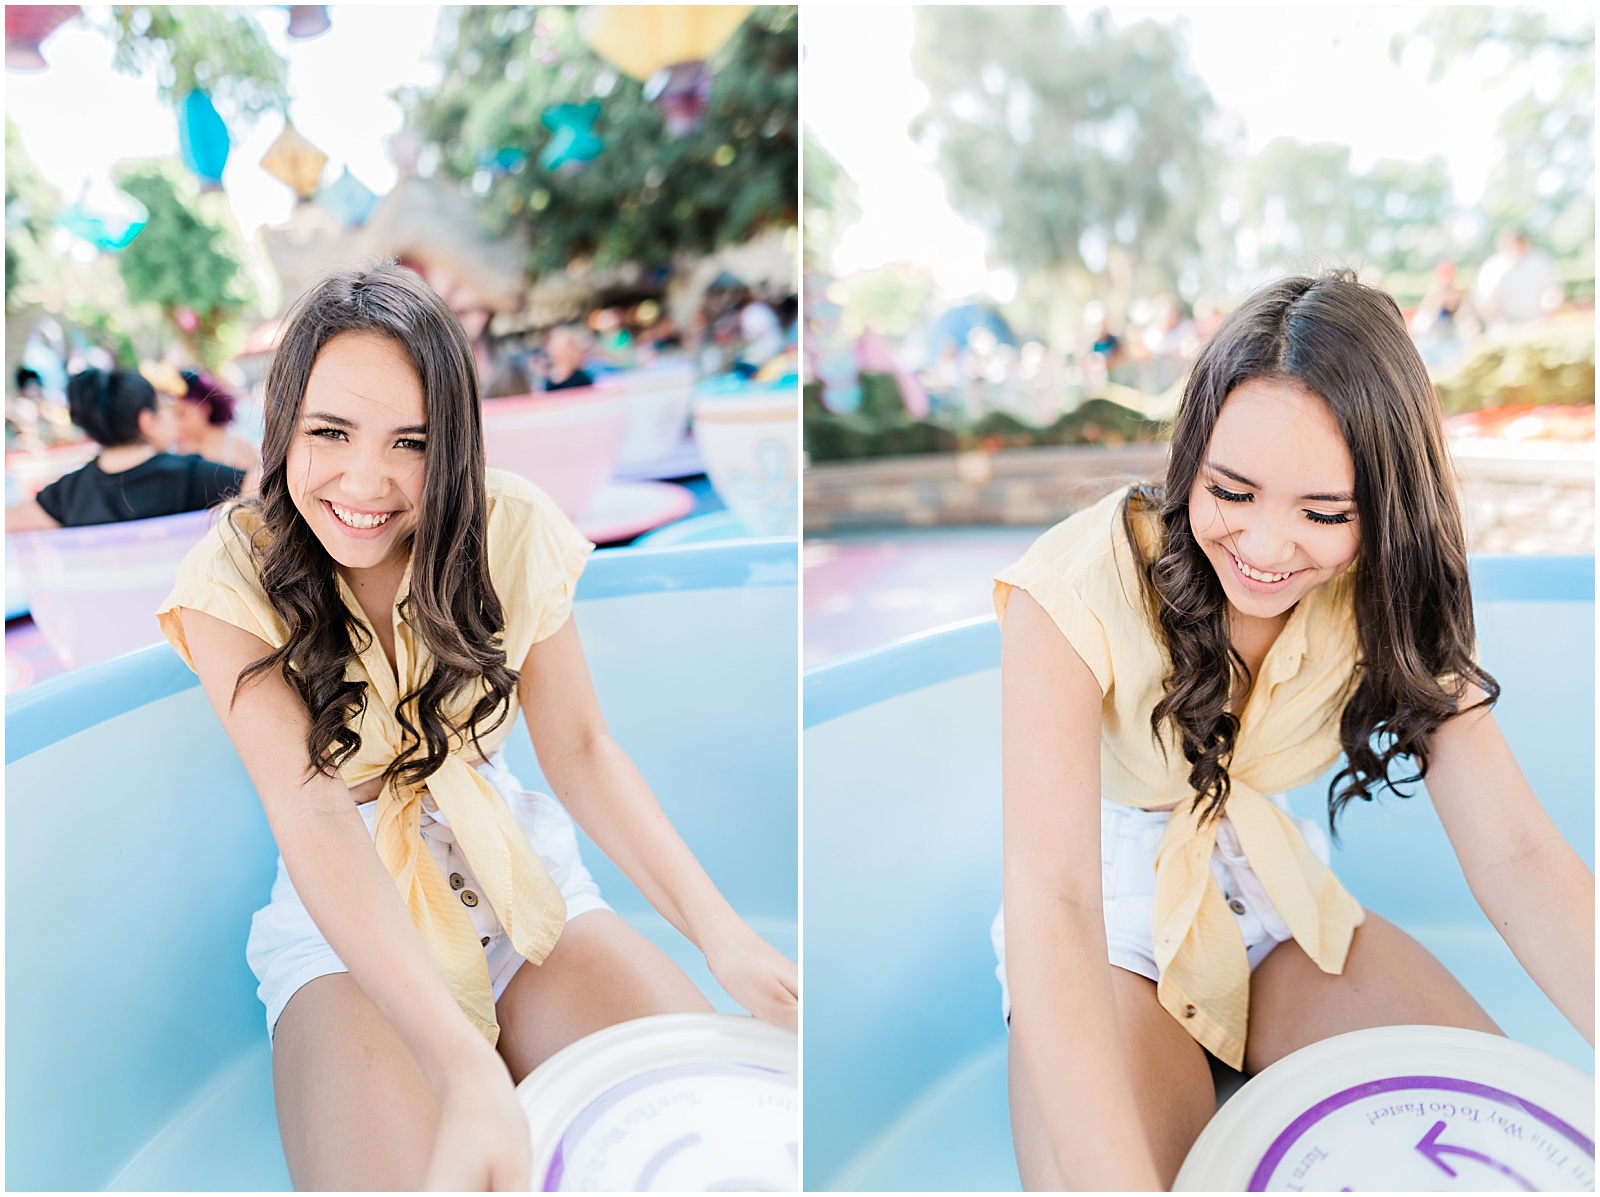 Disneyland Tea Cups Senior Session.  Images by Mollie Jane Photography. To see more go to www.molliejanephotography.com.